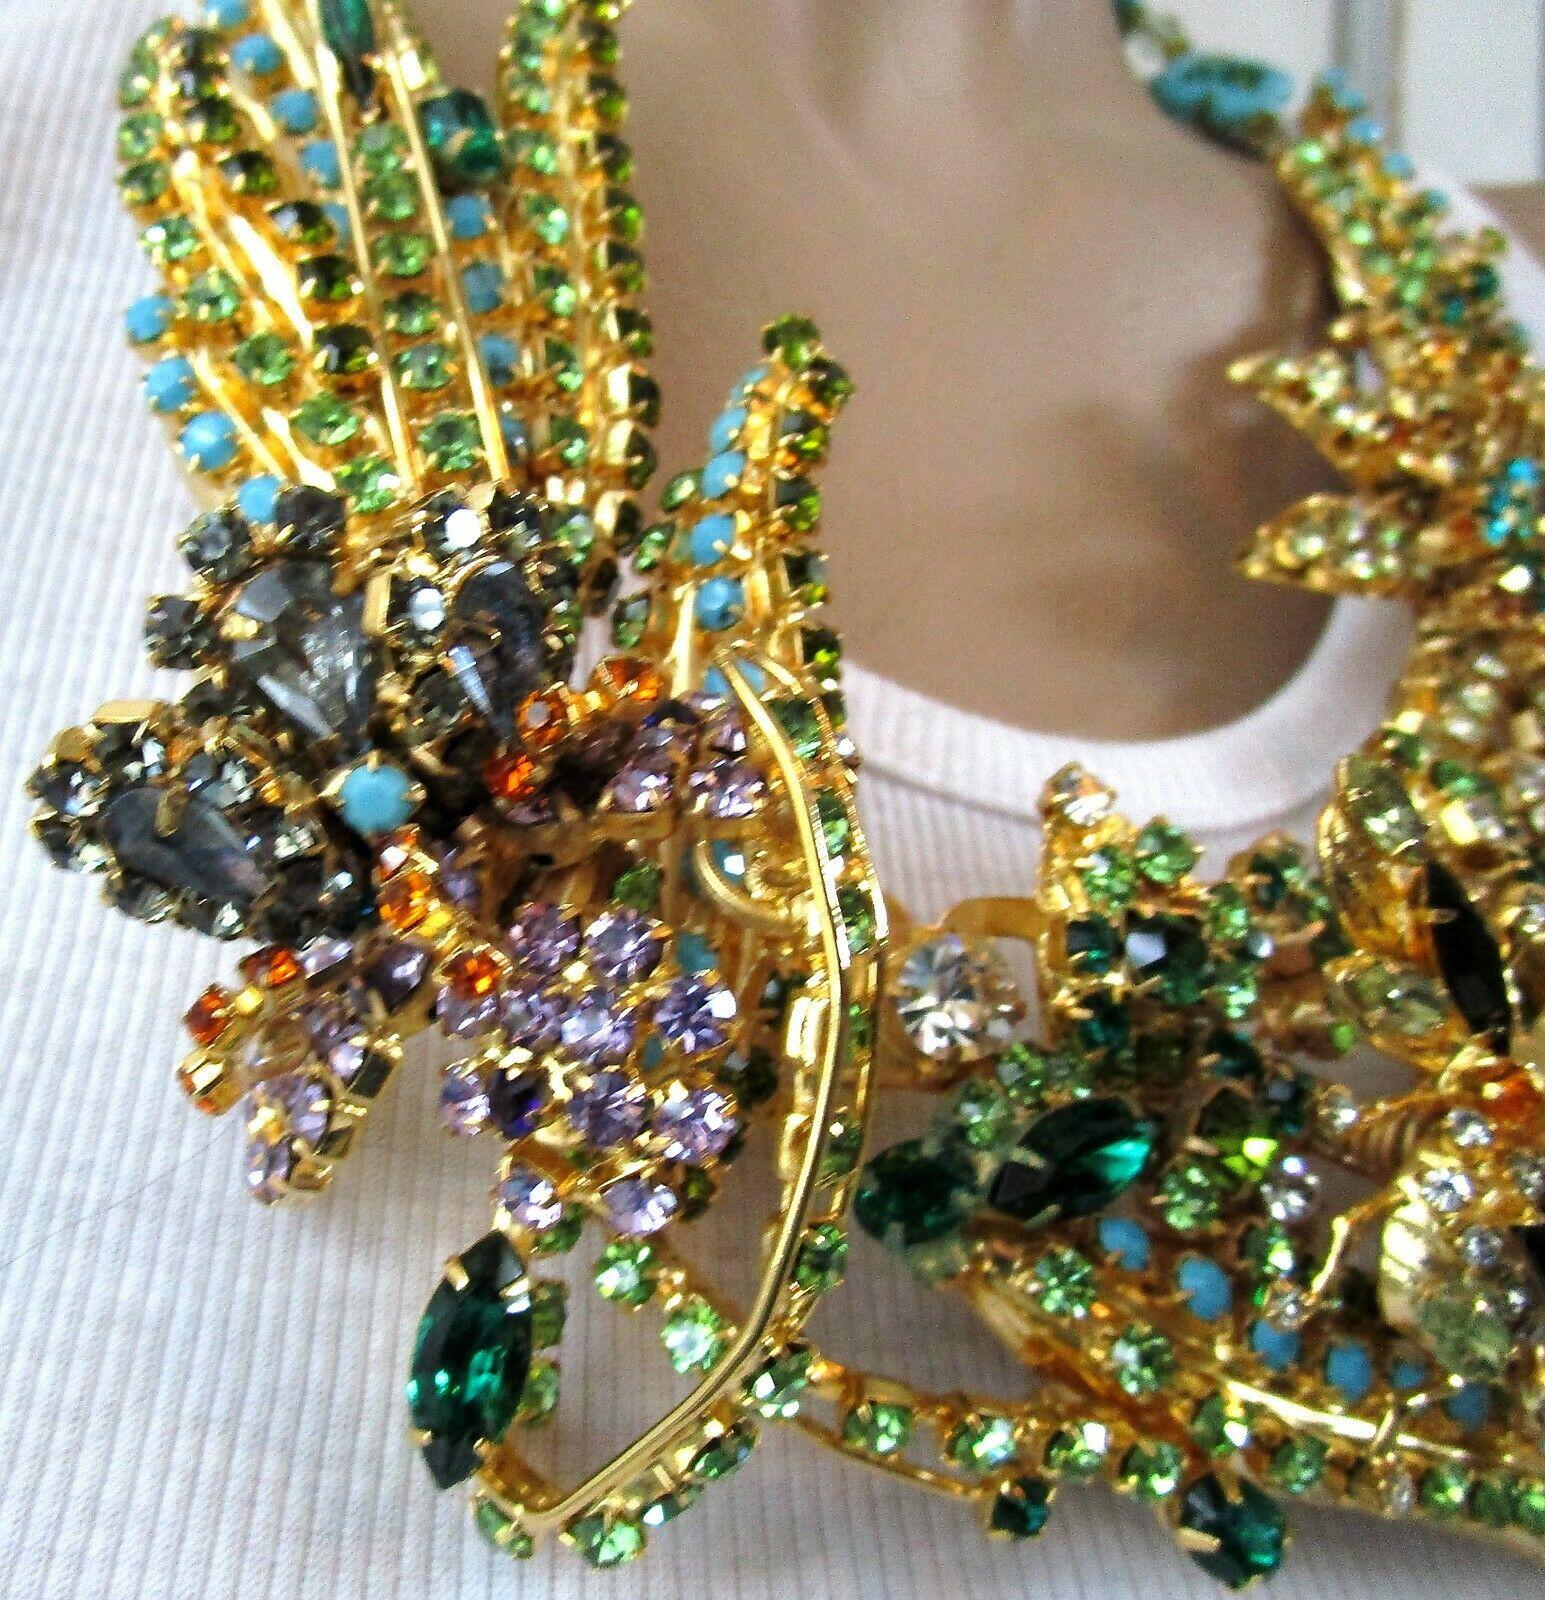 Fabulous Rare Museum Quality Designer Ken Morrison Crystal Bumble Bee Garden Necklace set with Swarovski crystals and a Trembler bumble bee amongst colorful foliage and flowers, suspended from open work turquoise clovers with givre (frosted) Murano